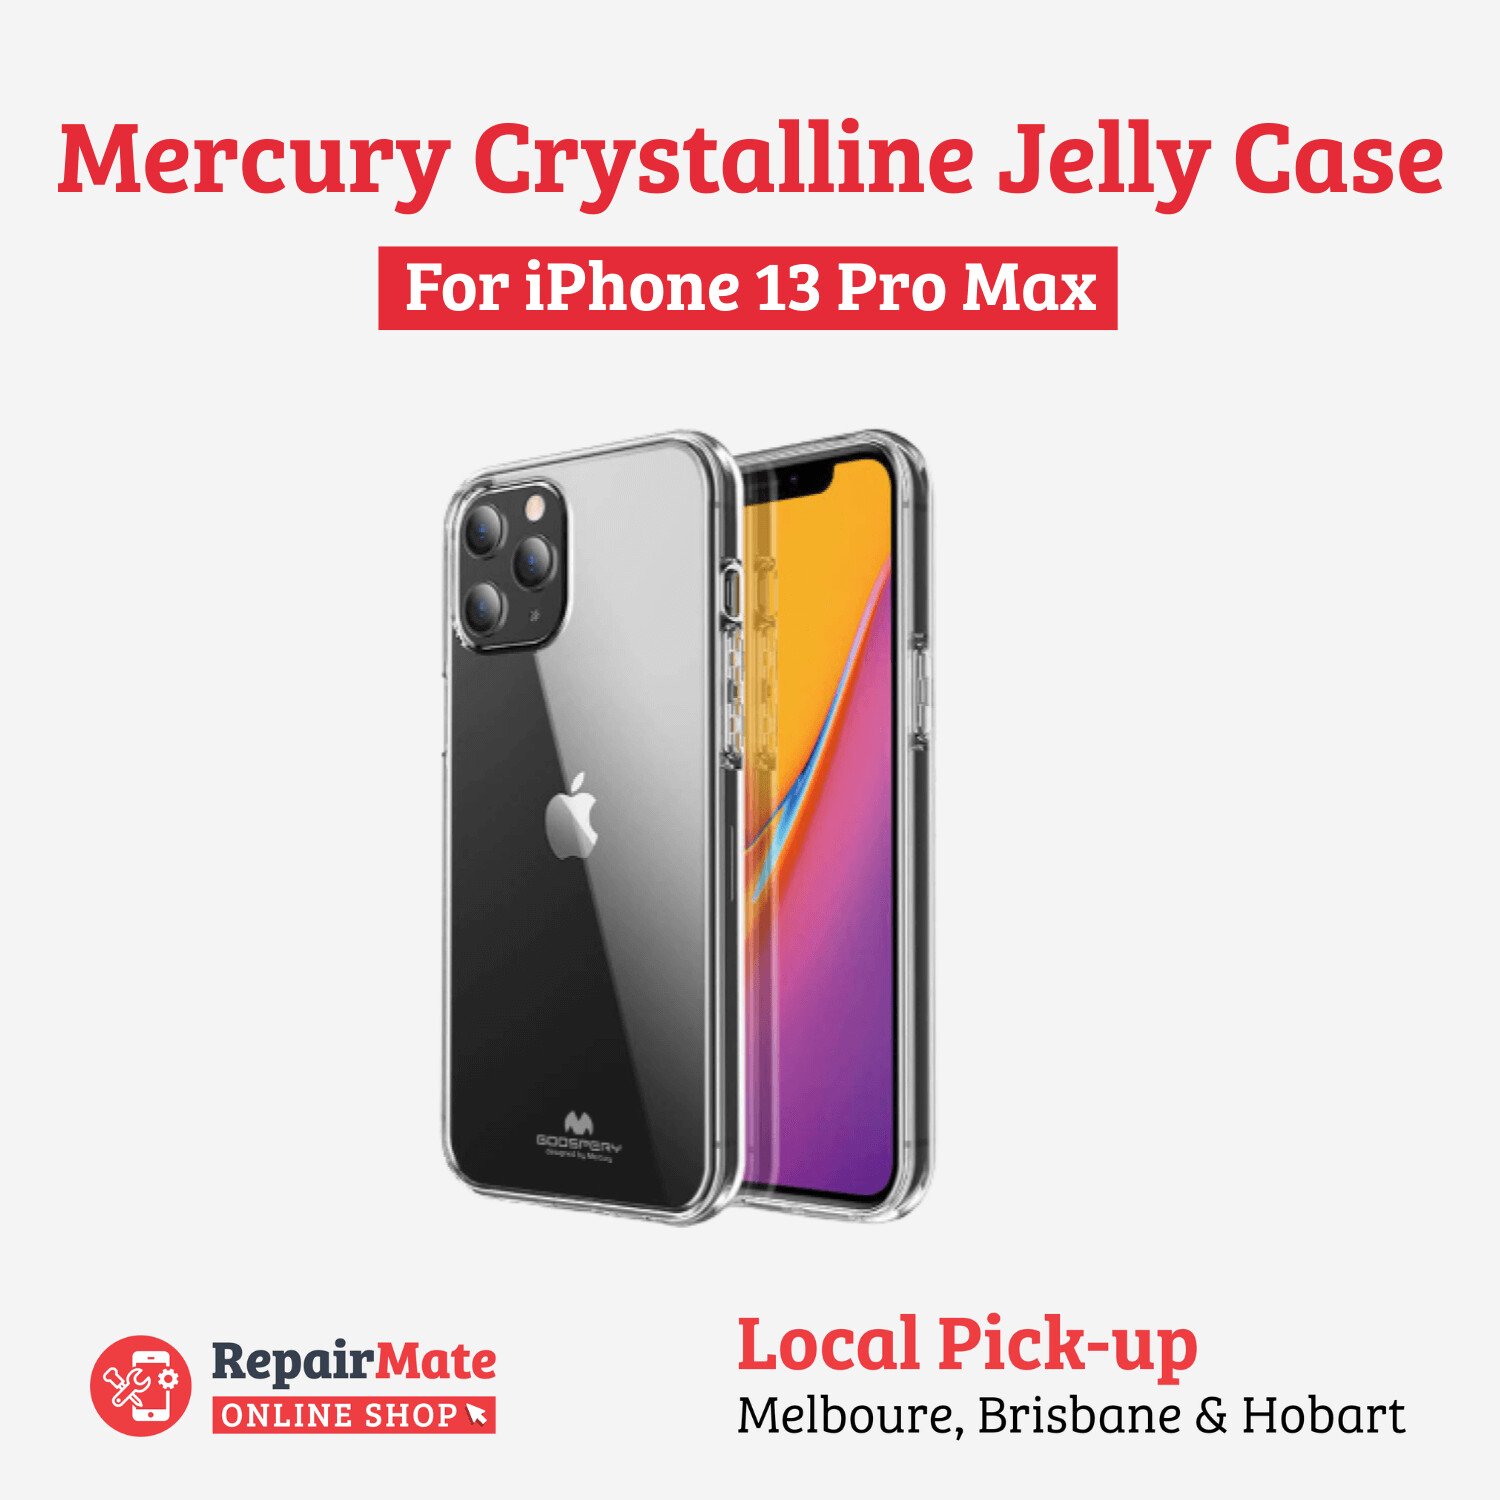 iPhone 13 Pro Max Mercury Crystalline Jelly Case Cover